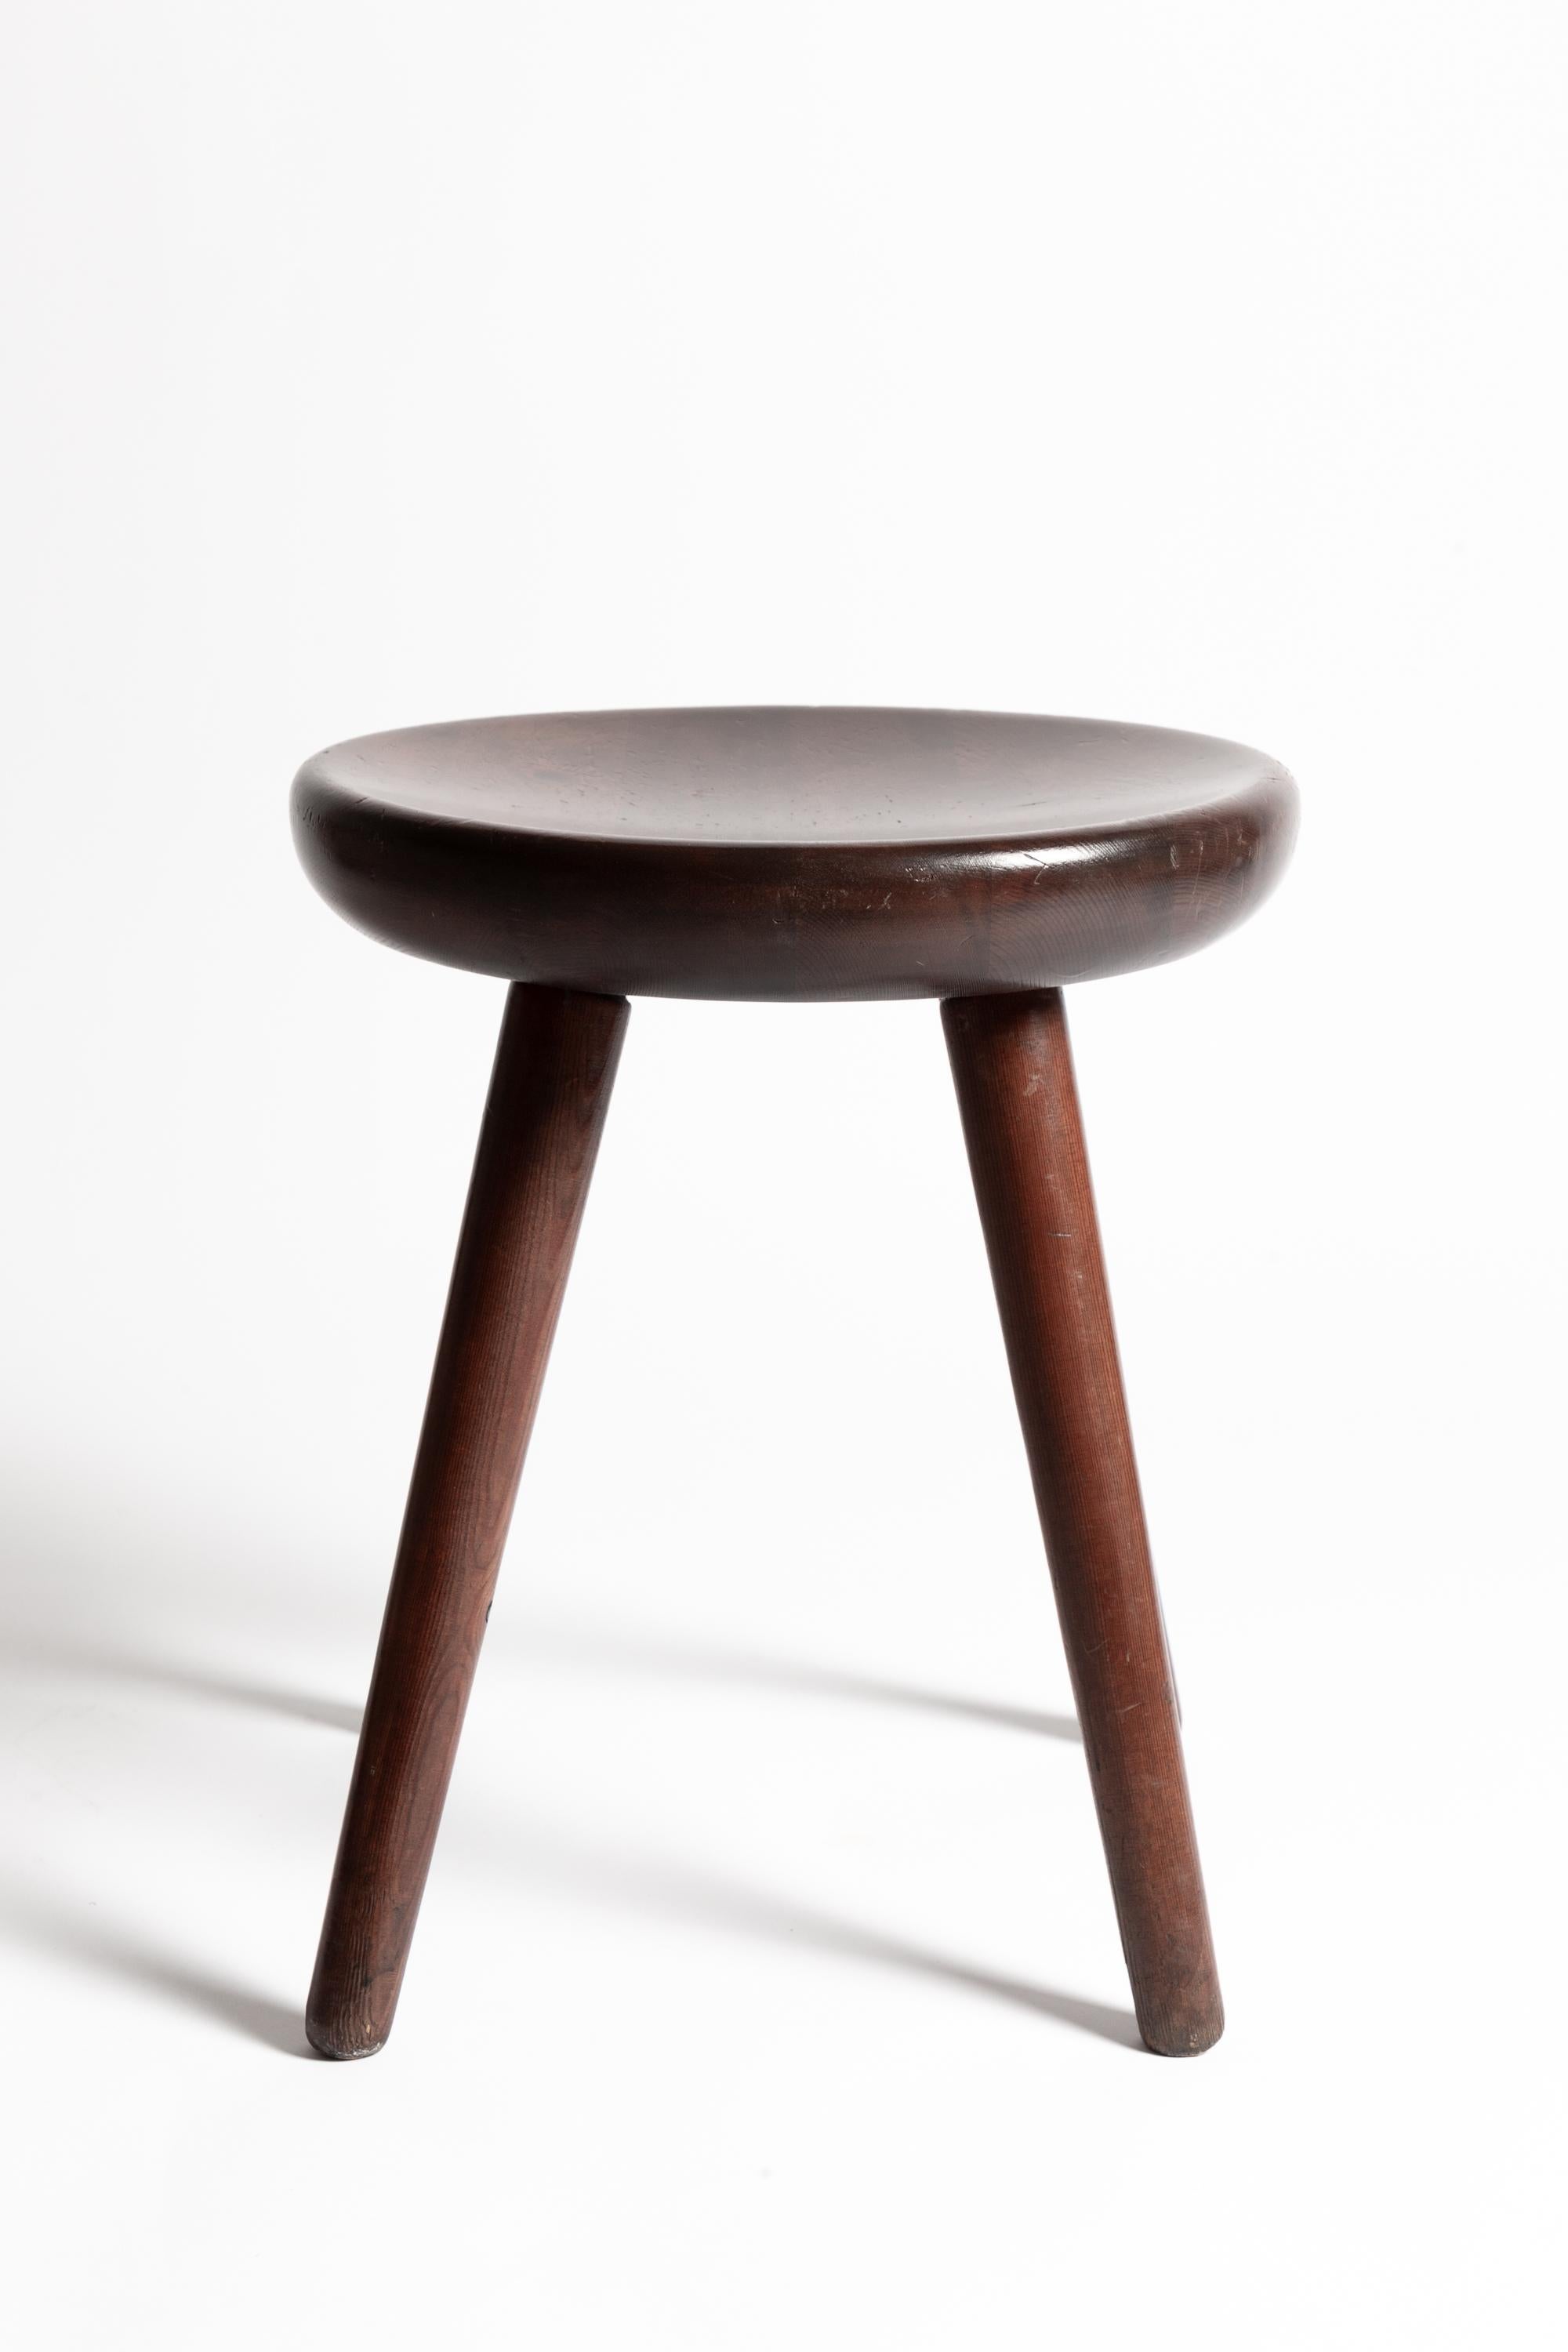 Pair of Four Legged Stools by Charlotte Perriand for Les Arcs For Sale 1